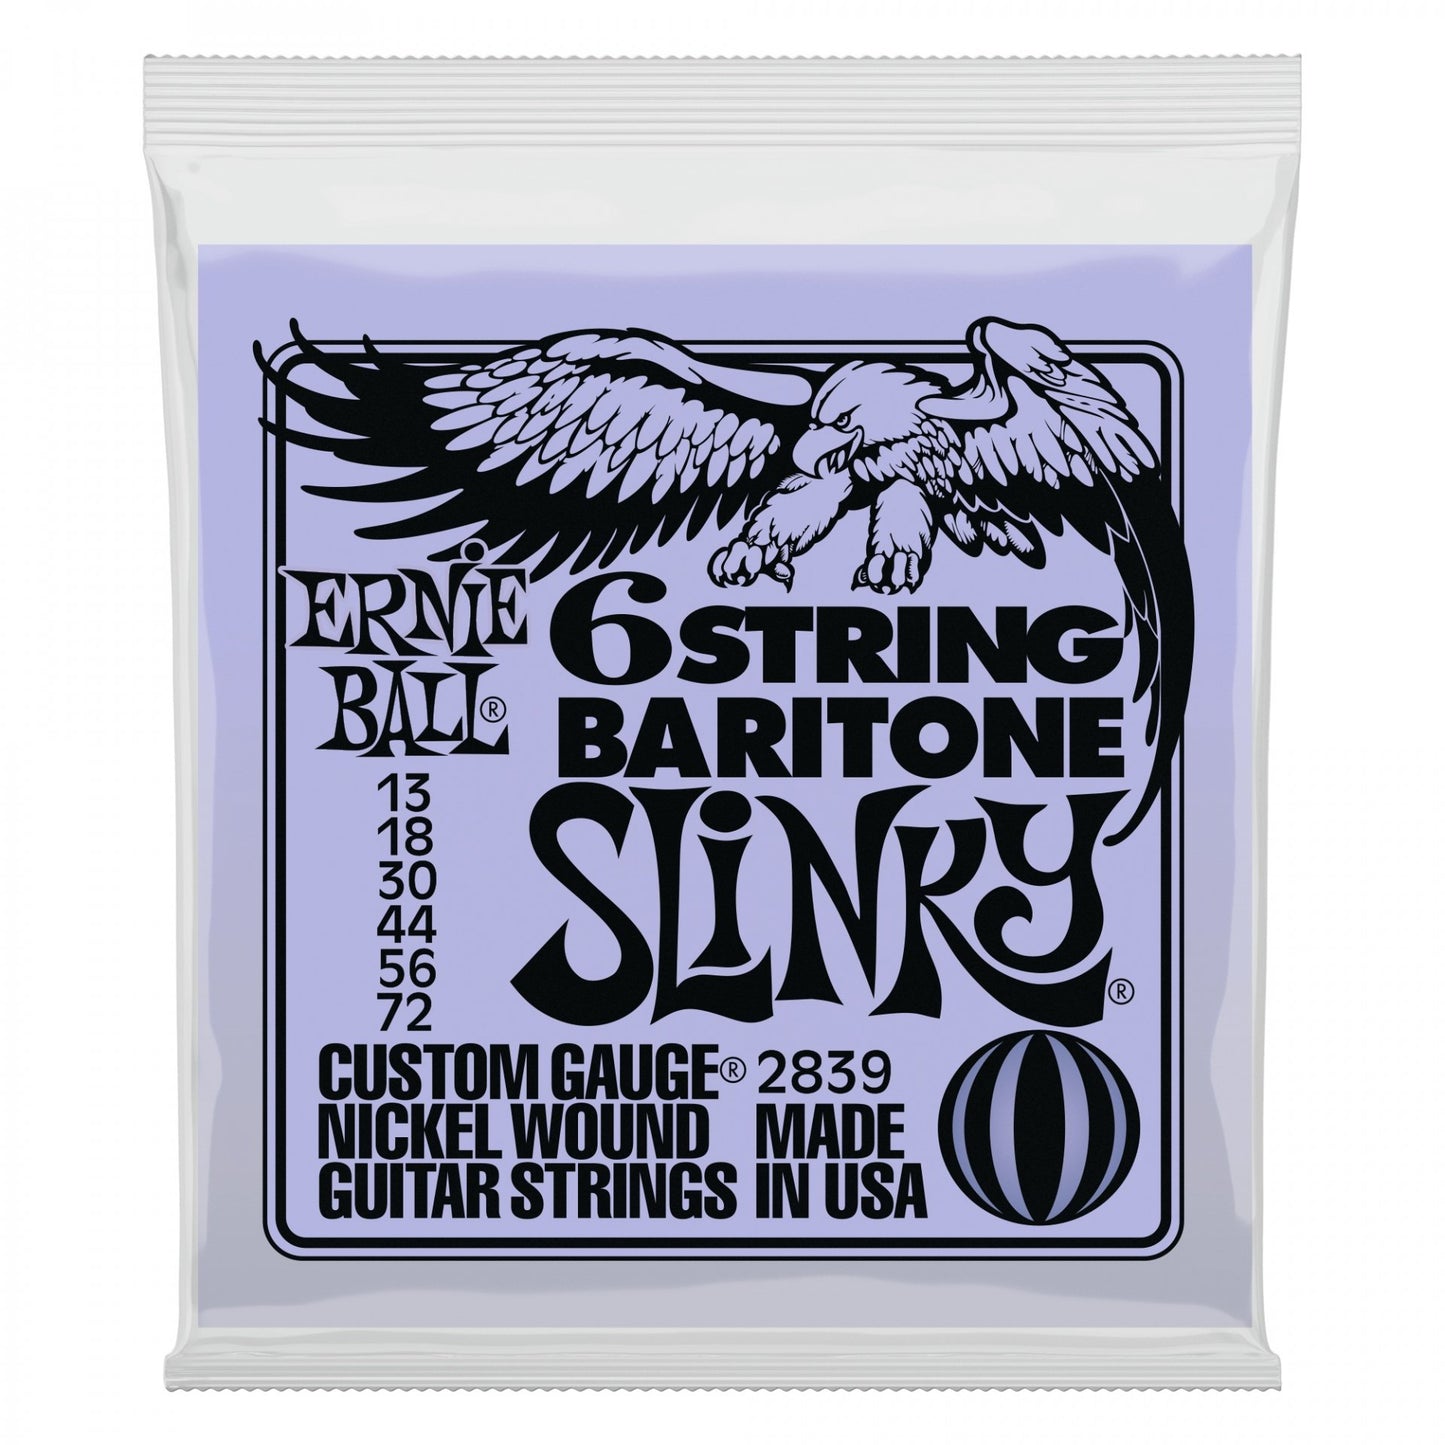 SLINKY 6-STRING W/ SMALL BALL END 29 5/8 SCALE BARITONE GUITAR STRINGS - 13-72 GAUGE ( 2839 )